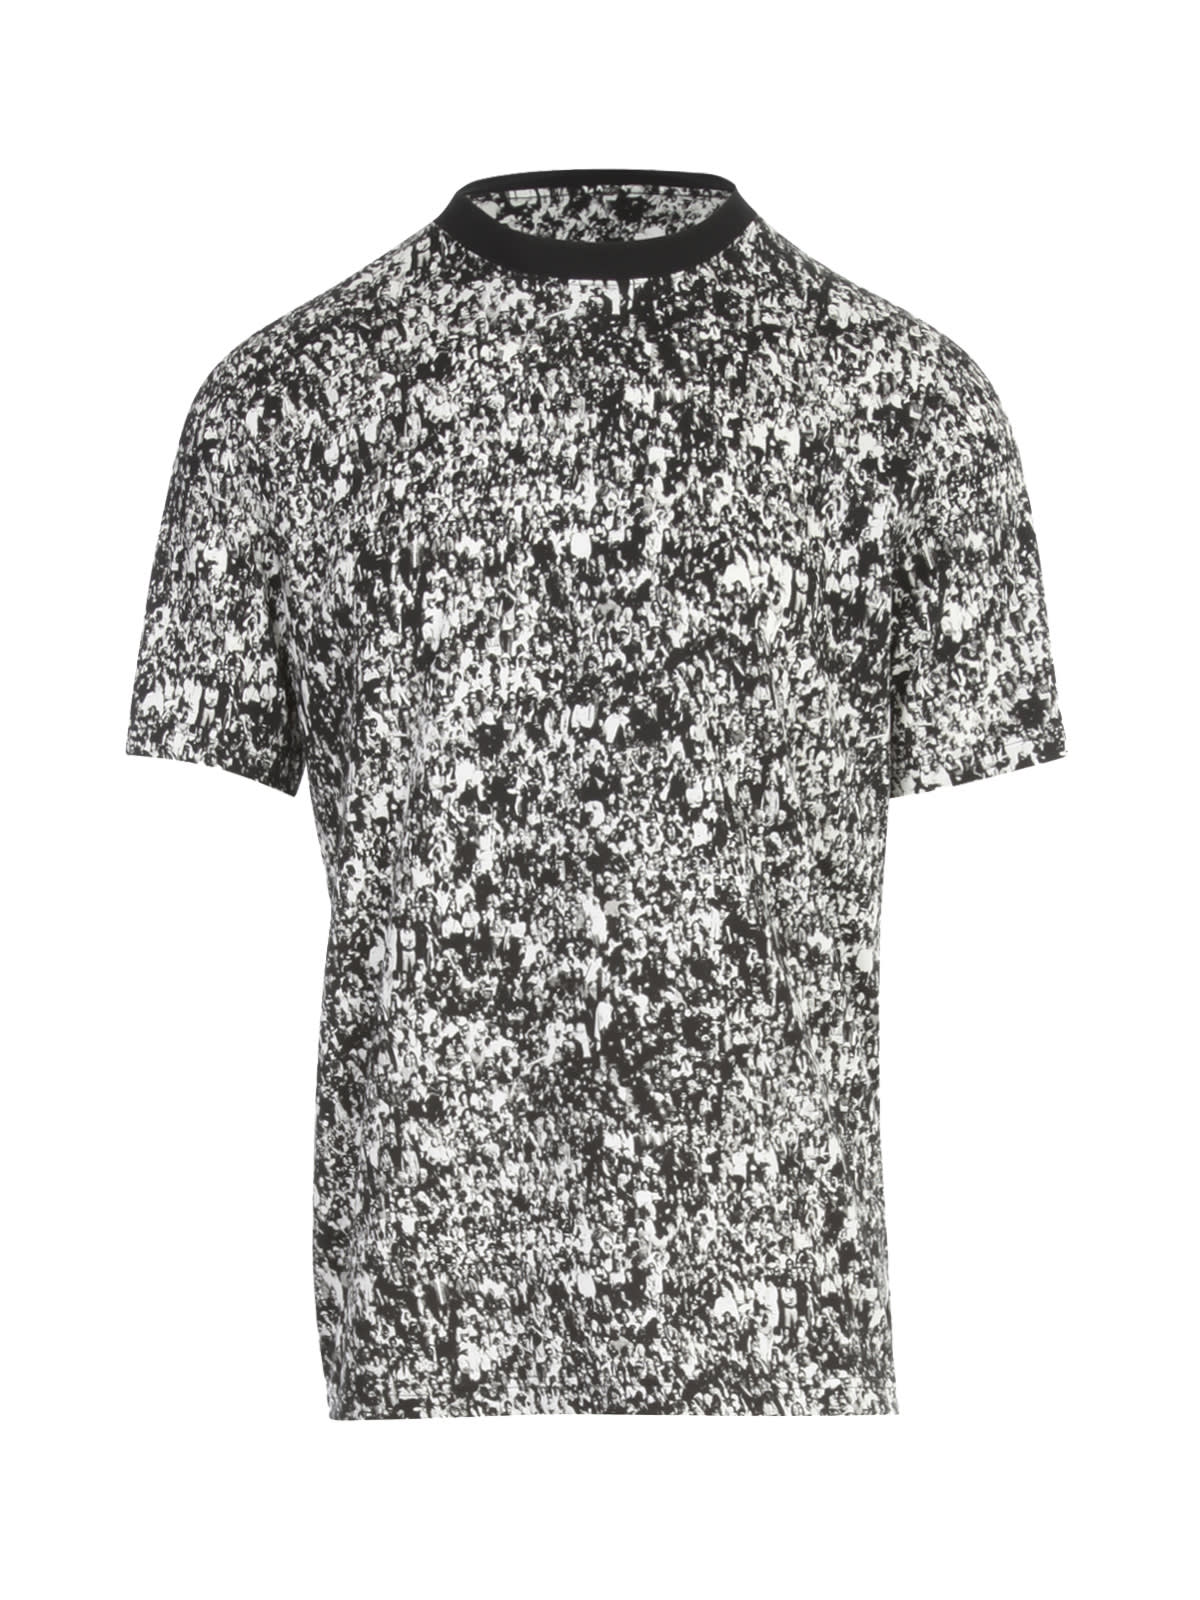 PS by Paul Smith Mens T-shirt Crowd Print